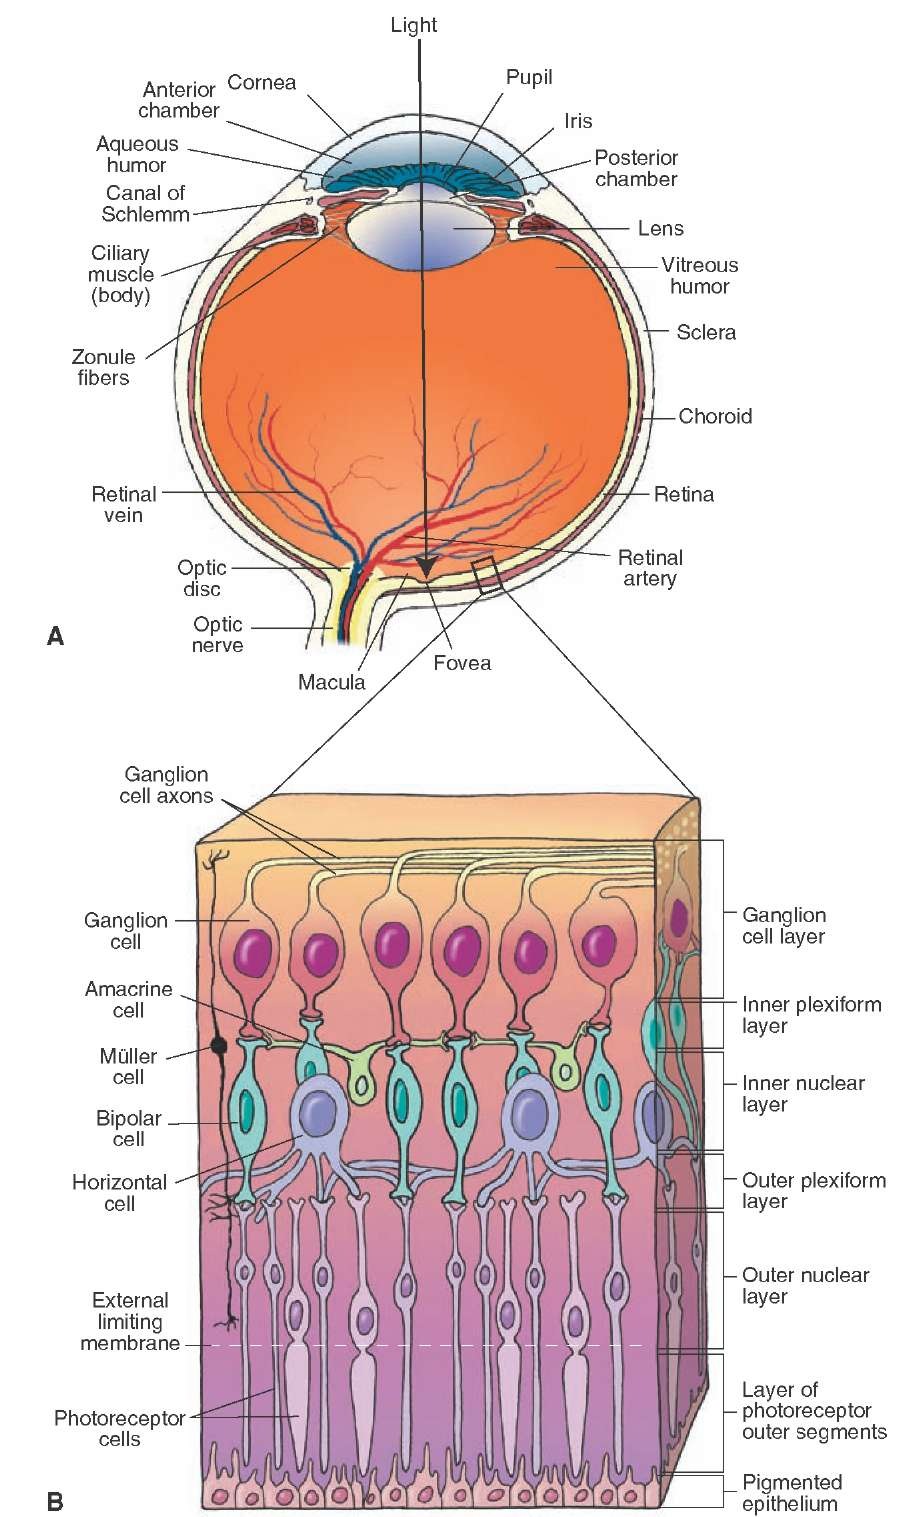  Structure of the eye and retina. (A) Different components of the eye. (B) Different layers of the human retina.